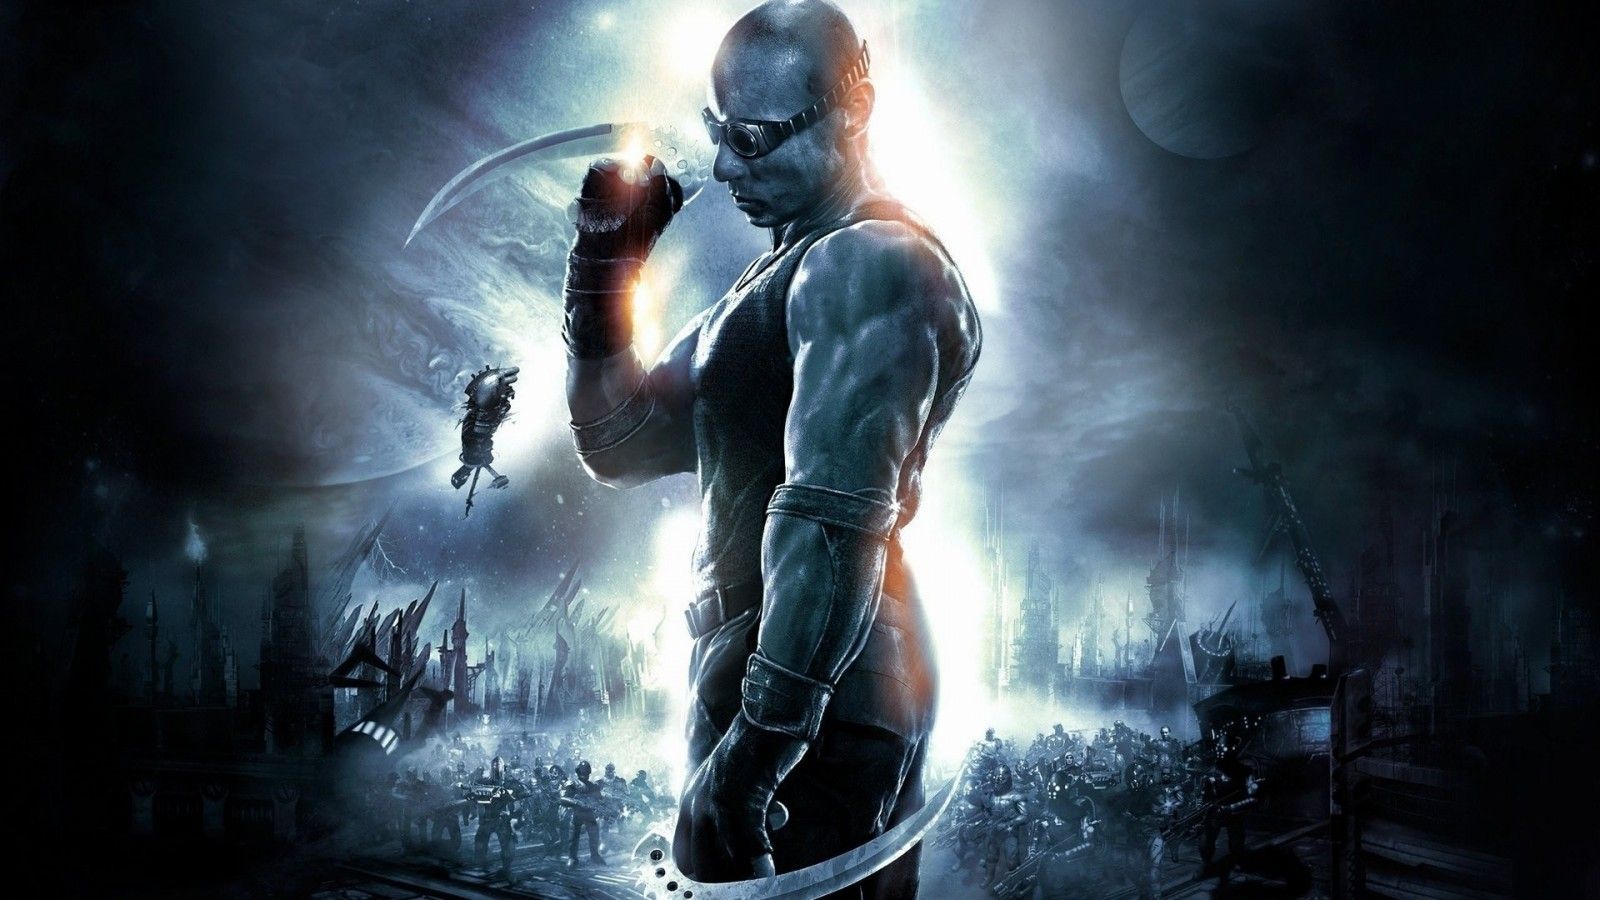 people, movies, science fiction, midnight, Riddick, The Chronicles of Riddick, darkness, screenshot, computer wallpaper, fictional character, pc game, action film High quality walls